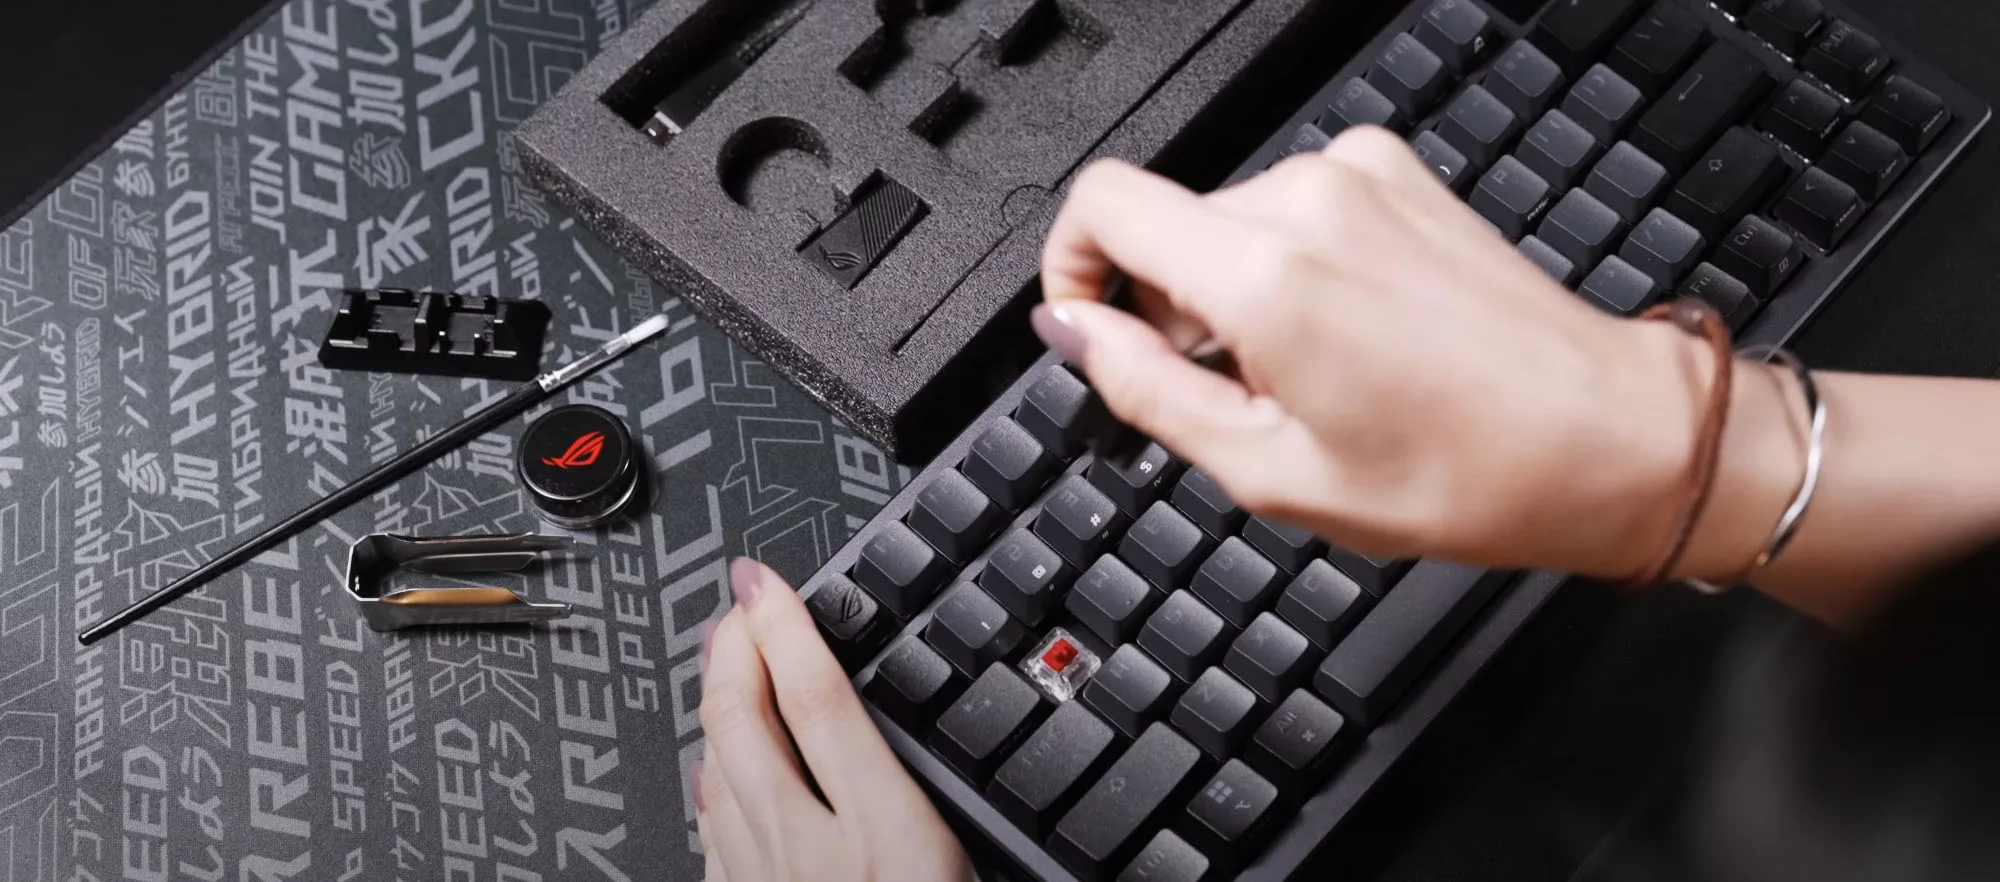 A hand removing a keycap from the ROG Azoth keyboard.